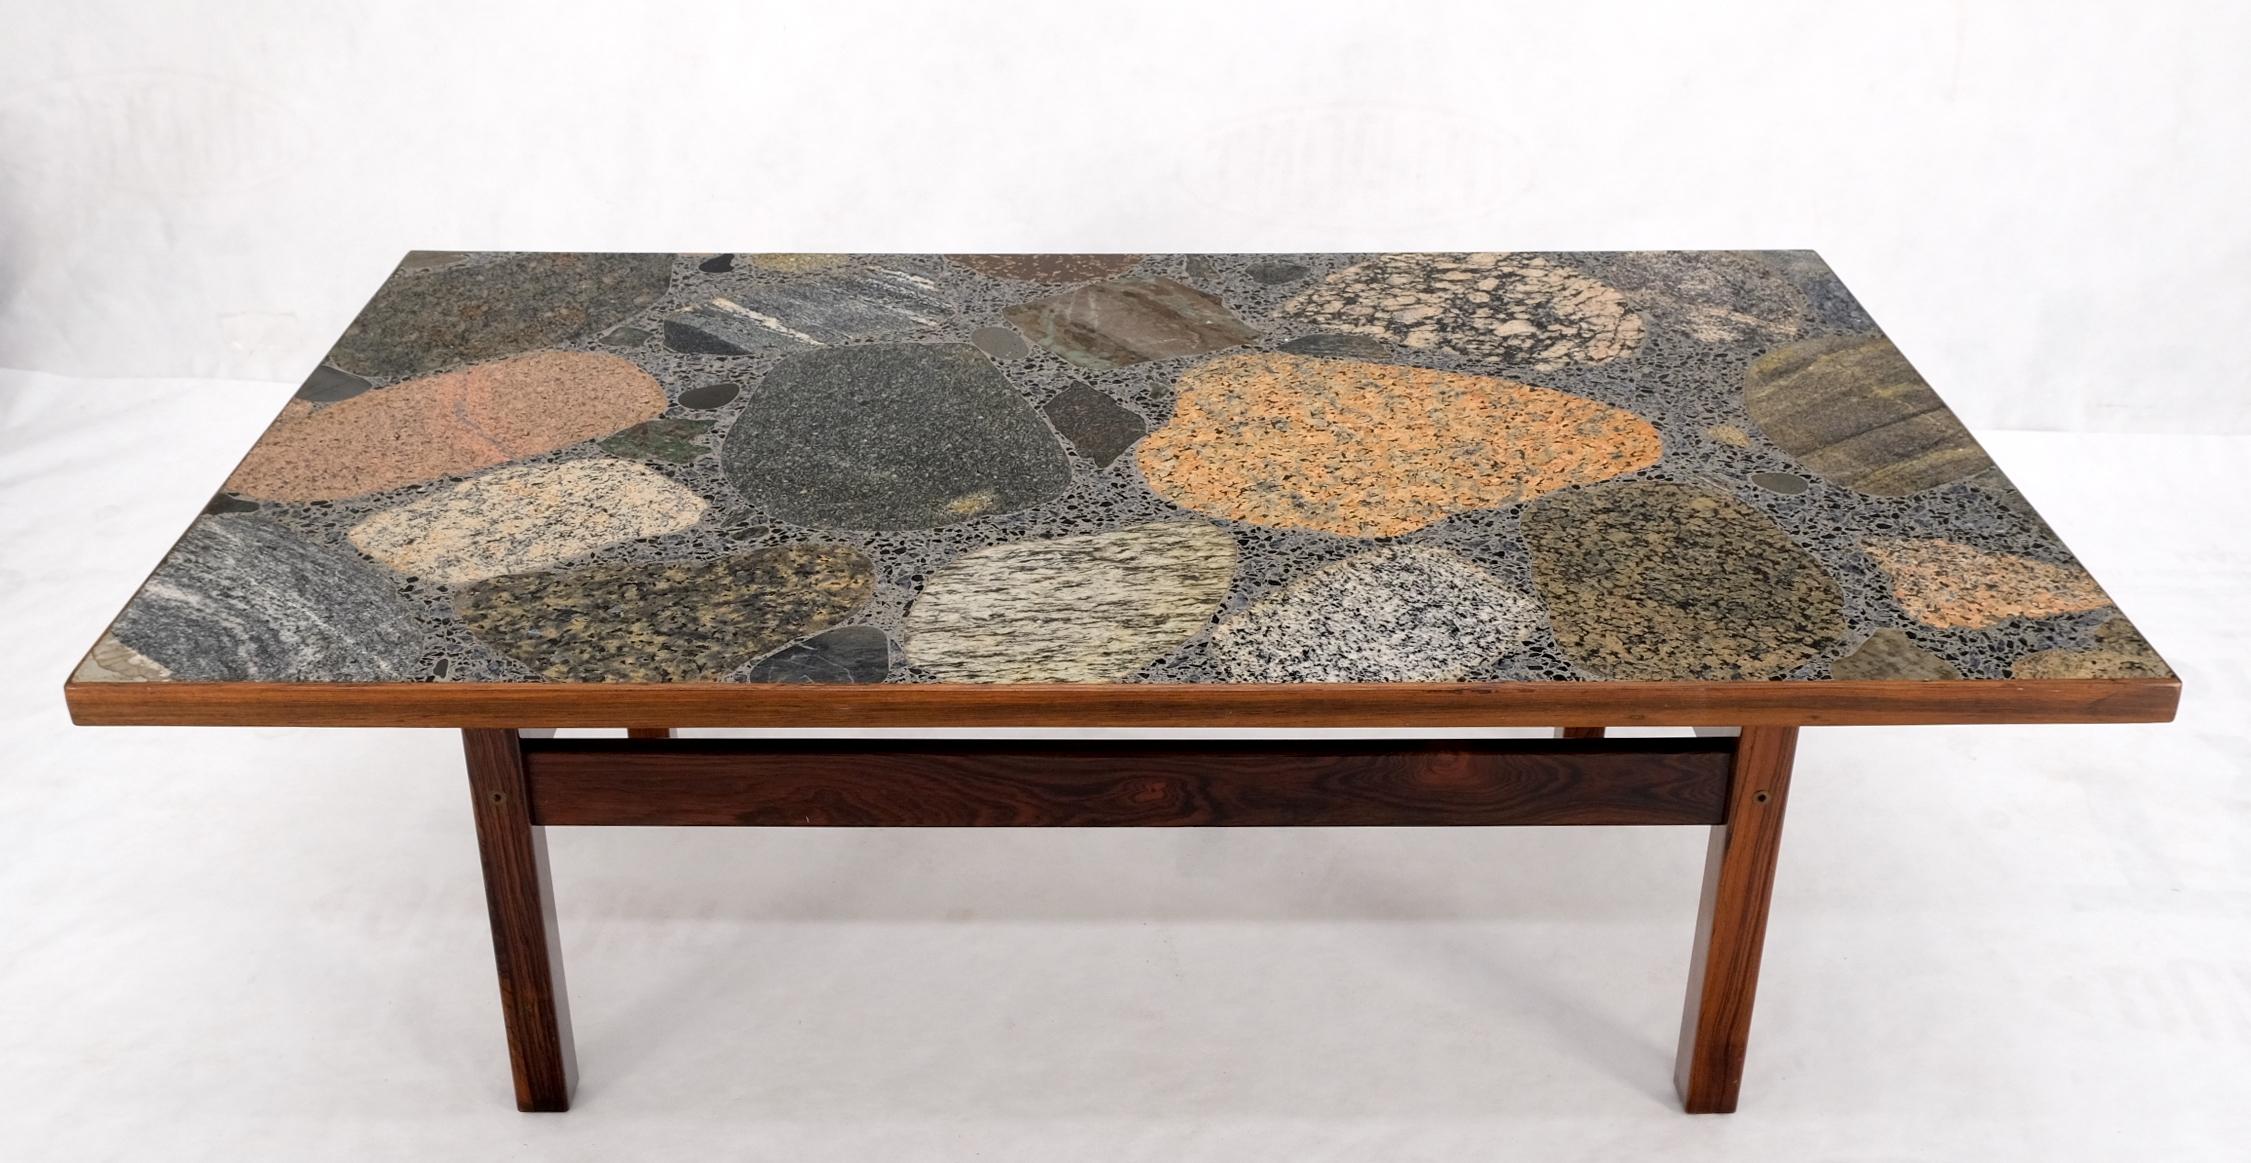 Solid Rosewood Base Terrazzo Granite Top Rectangle Danish Modern Coffee Table For Sale 2